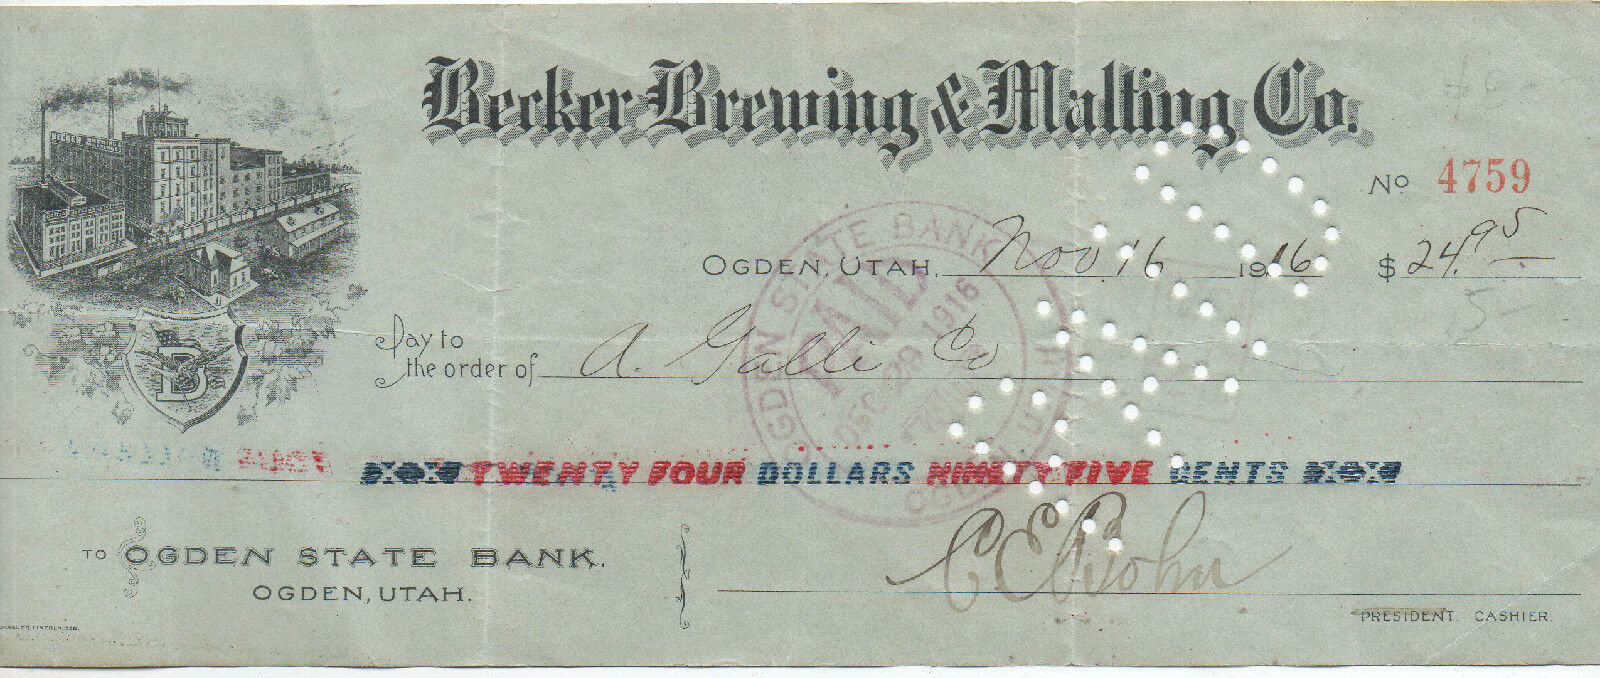 1916 Pre Pro Beer Check from the Becker Brewing & Malting Co Ogden Utah